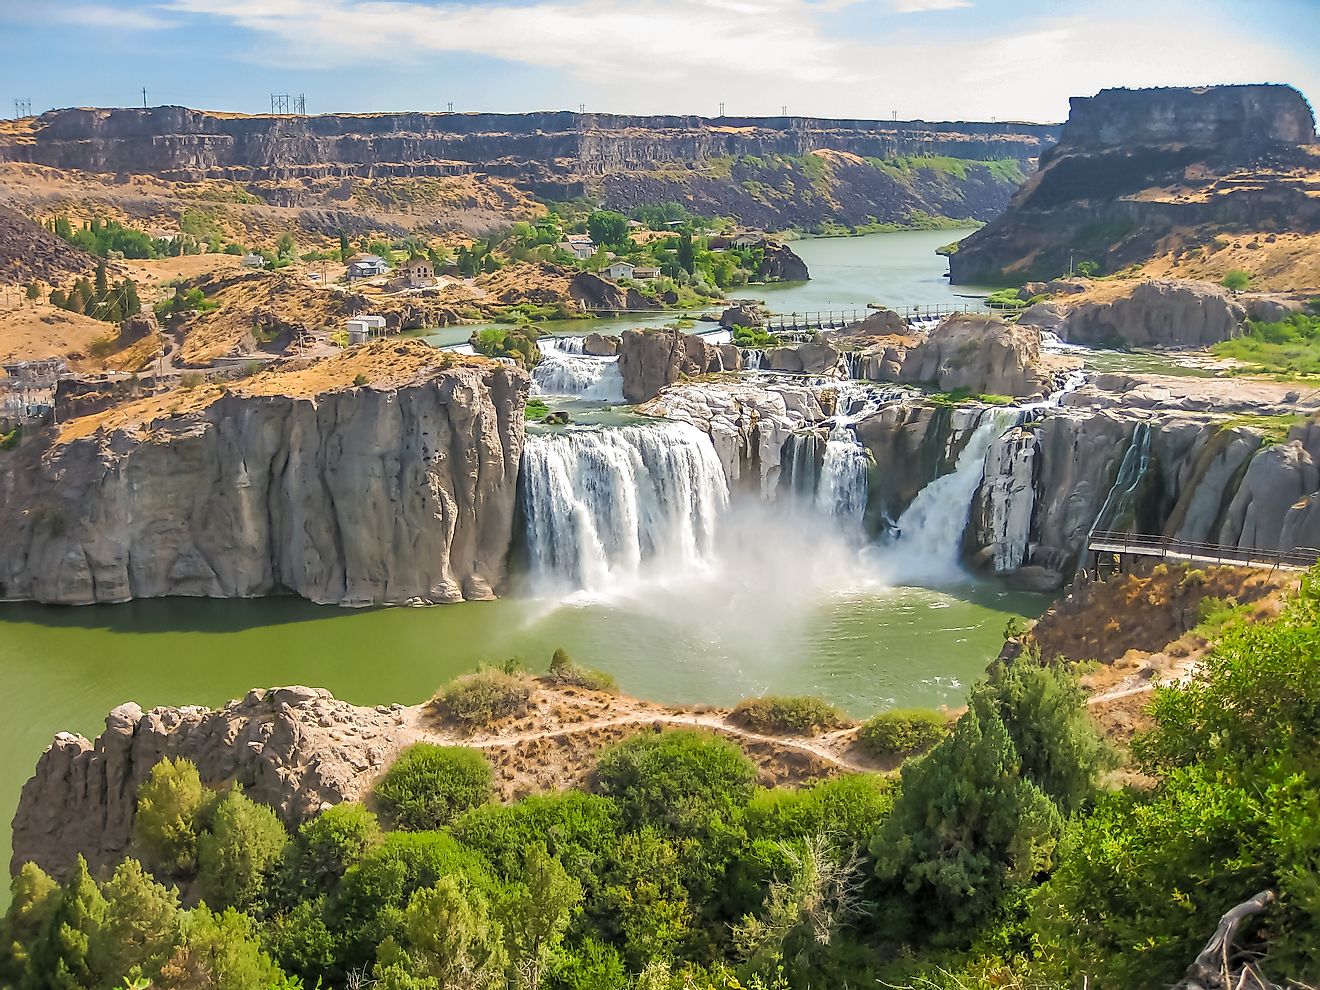 Aerial view of Shoshone Falls or Niagara of the West, Snake River, Idaho, United States.